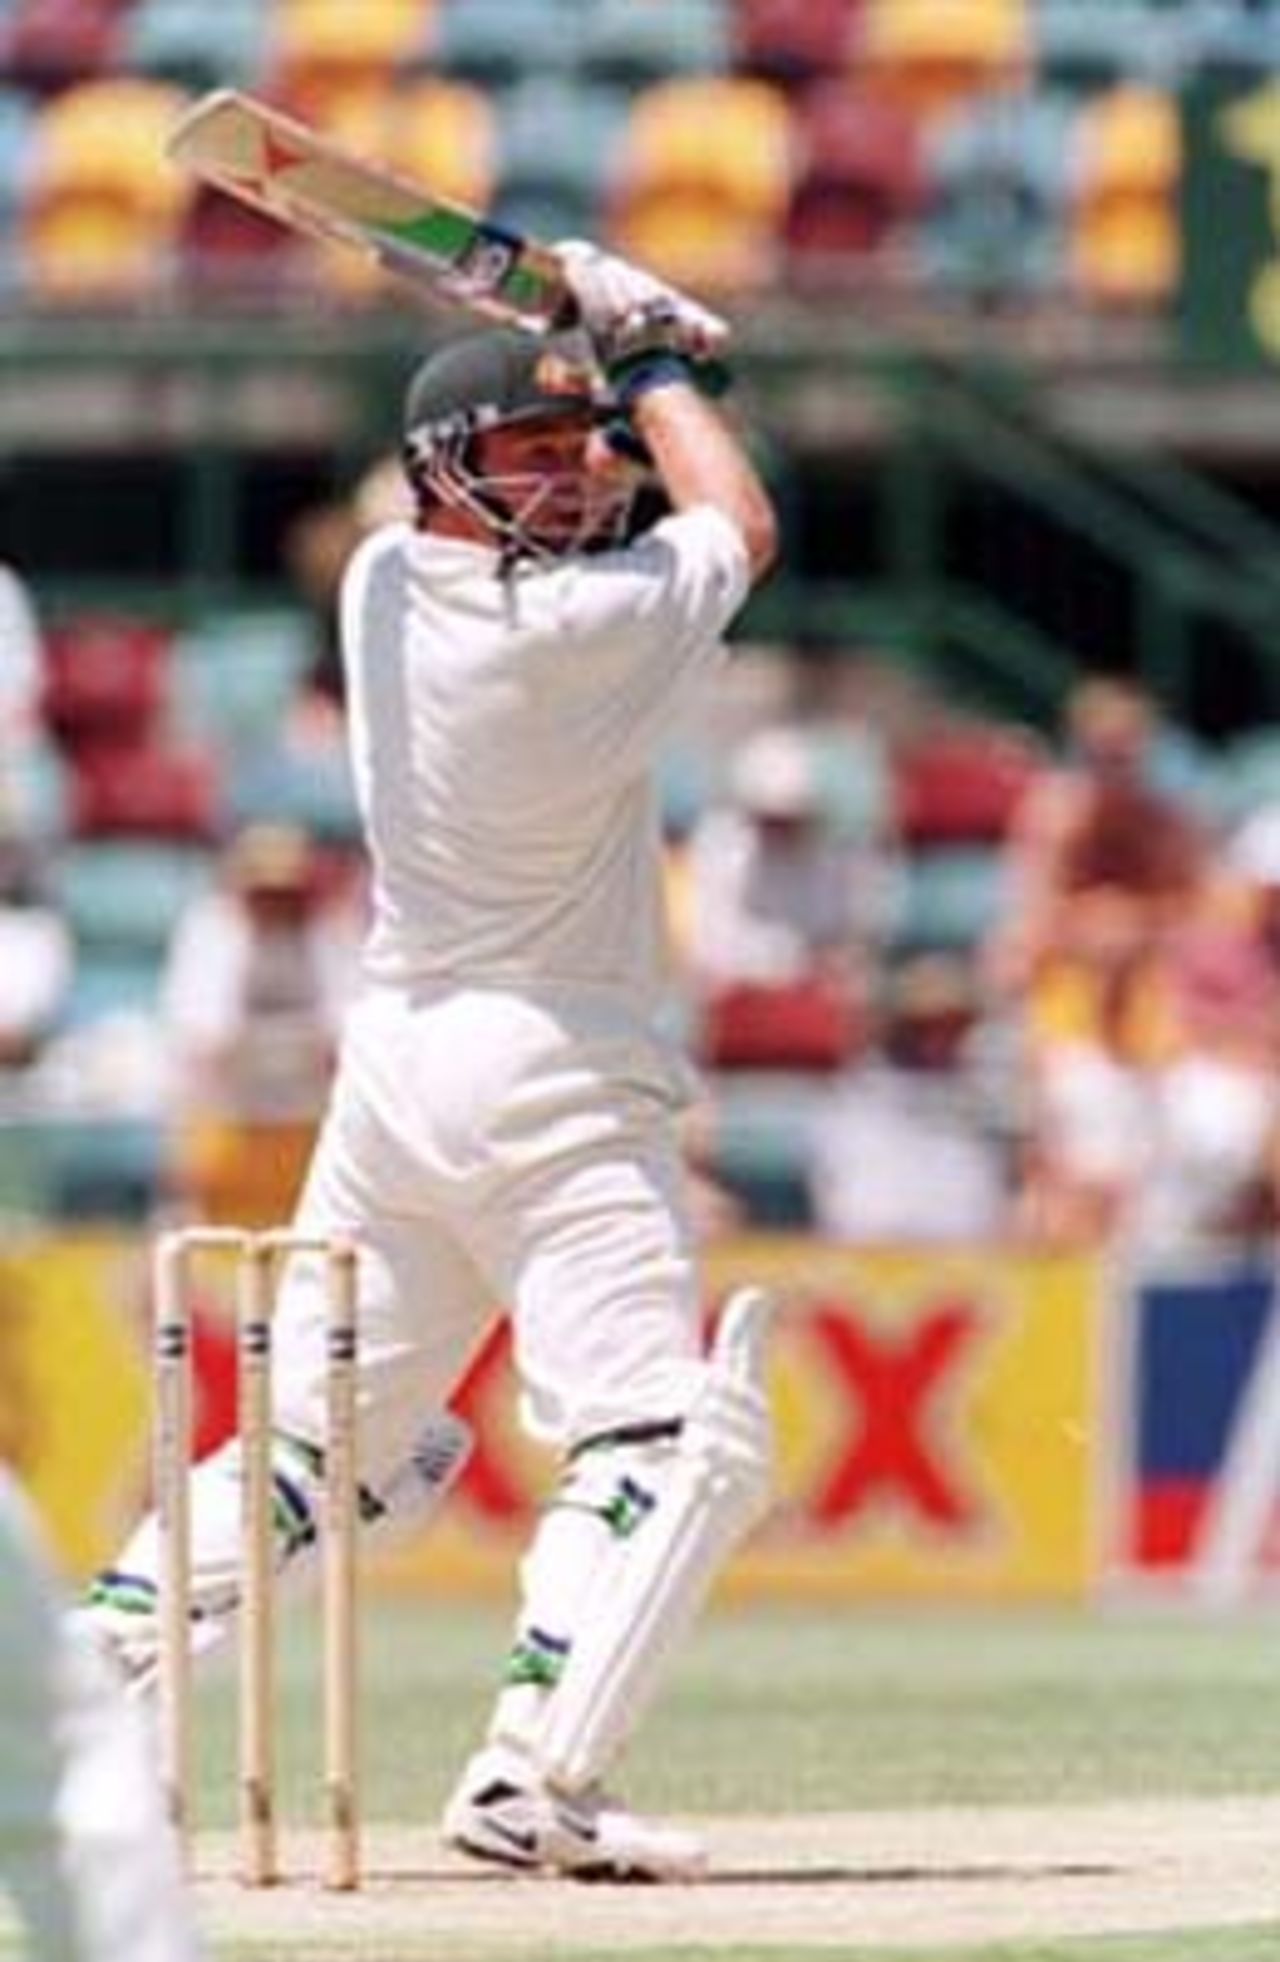 Paul Reiffel cuts on his way to 77 runs during the 2nd day of the 1st Test between Australia and New Zealand at the Gabba ground in Qld, 7 - -11 November 1997